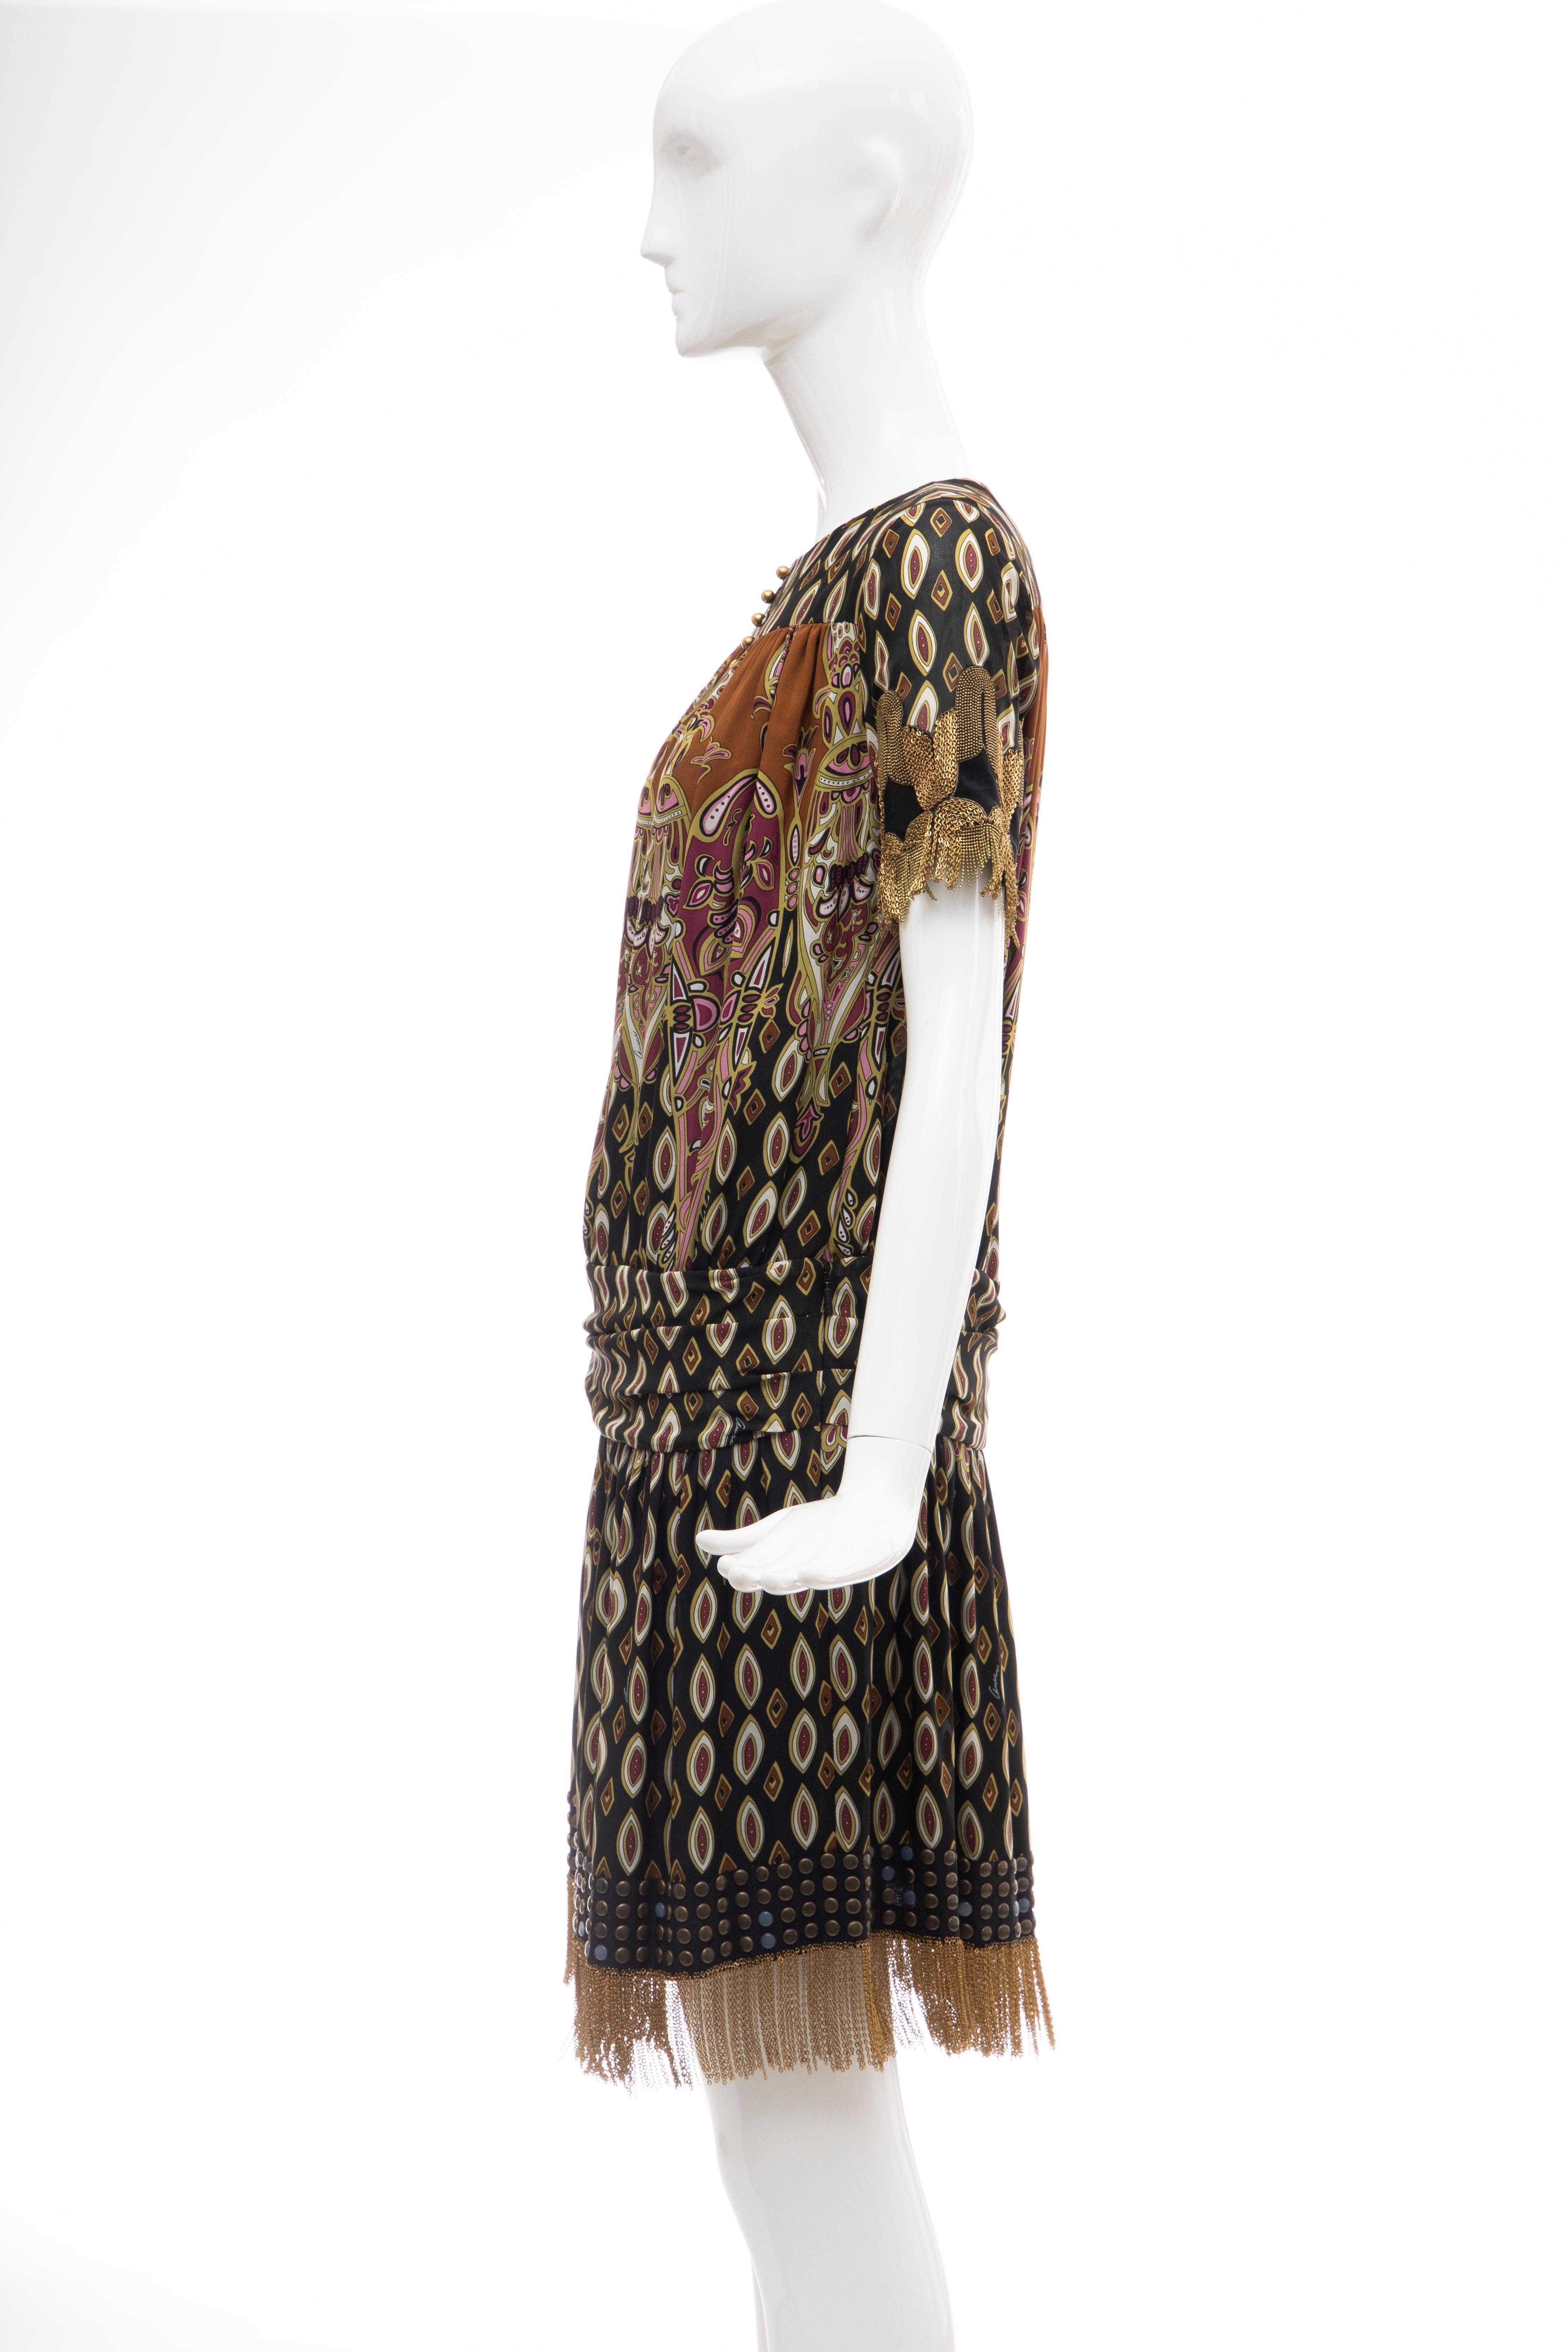 Frida Giannini for Gucci Runway Silk Boteh Pattern Brass Chains Dress, Fall 2008 For Sale 5